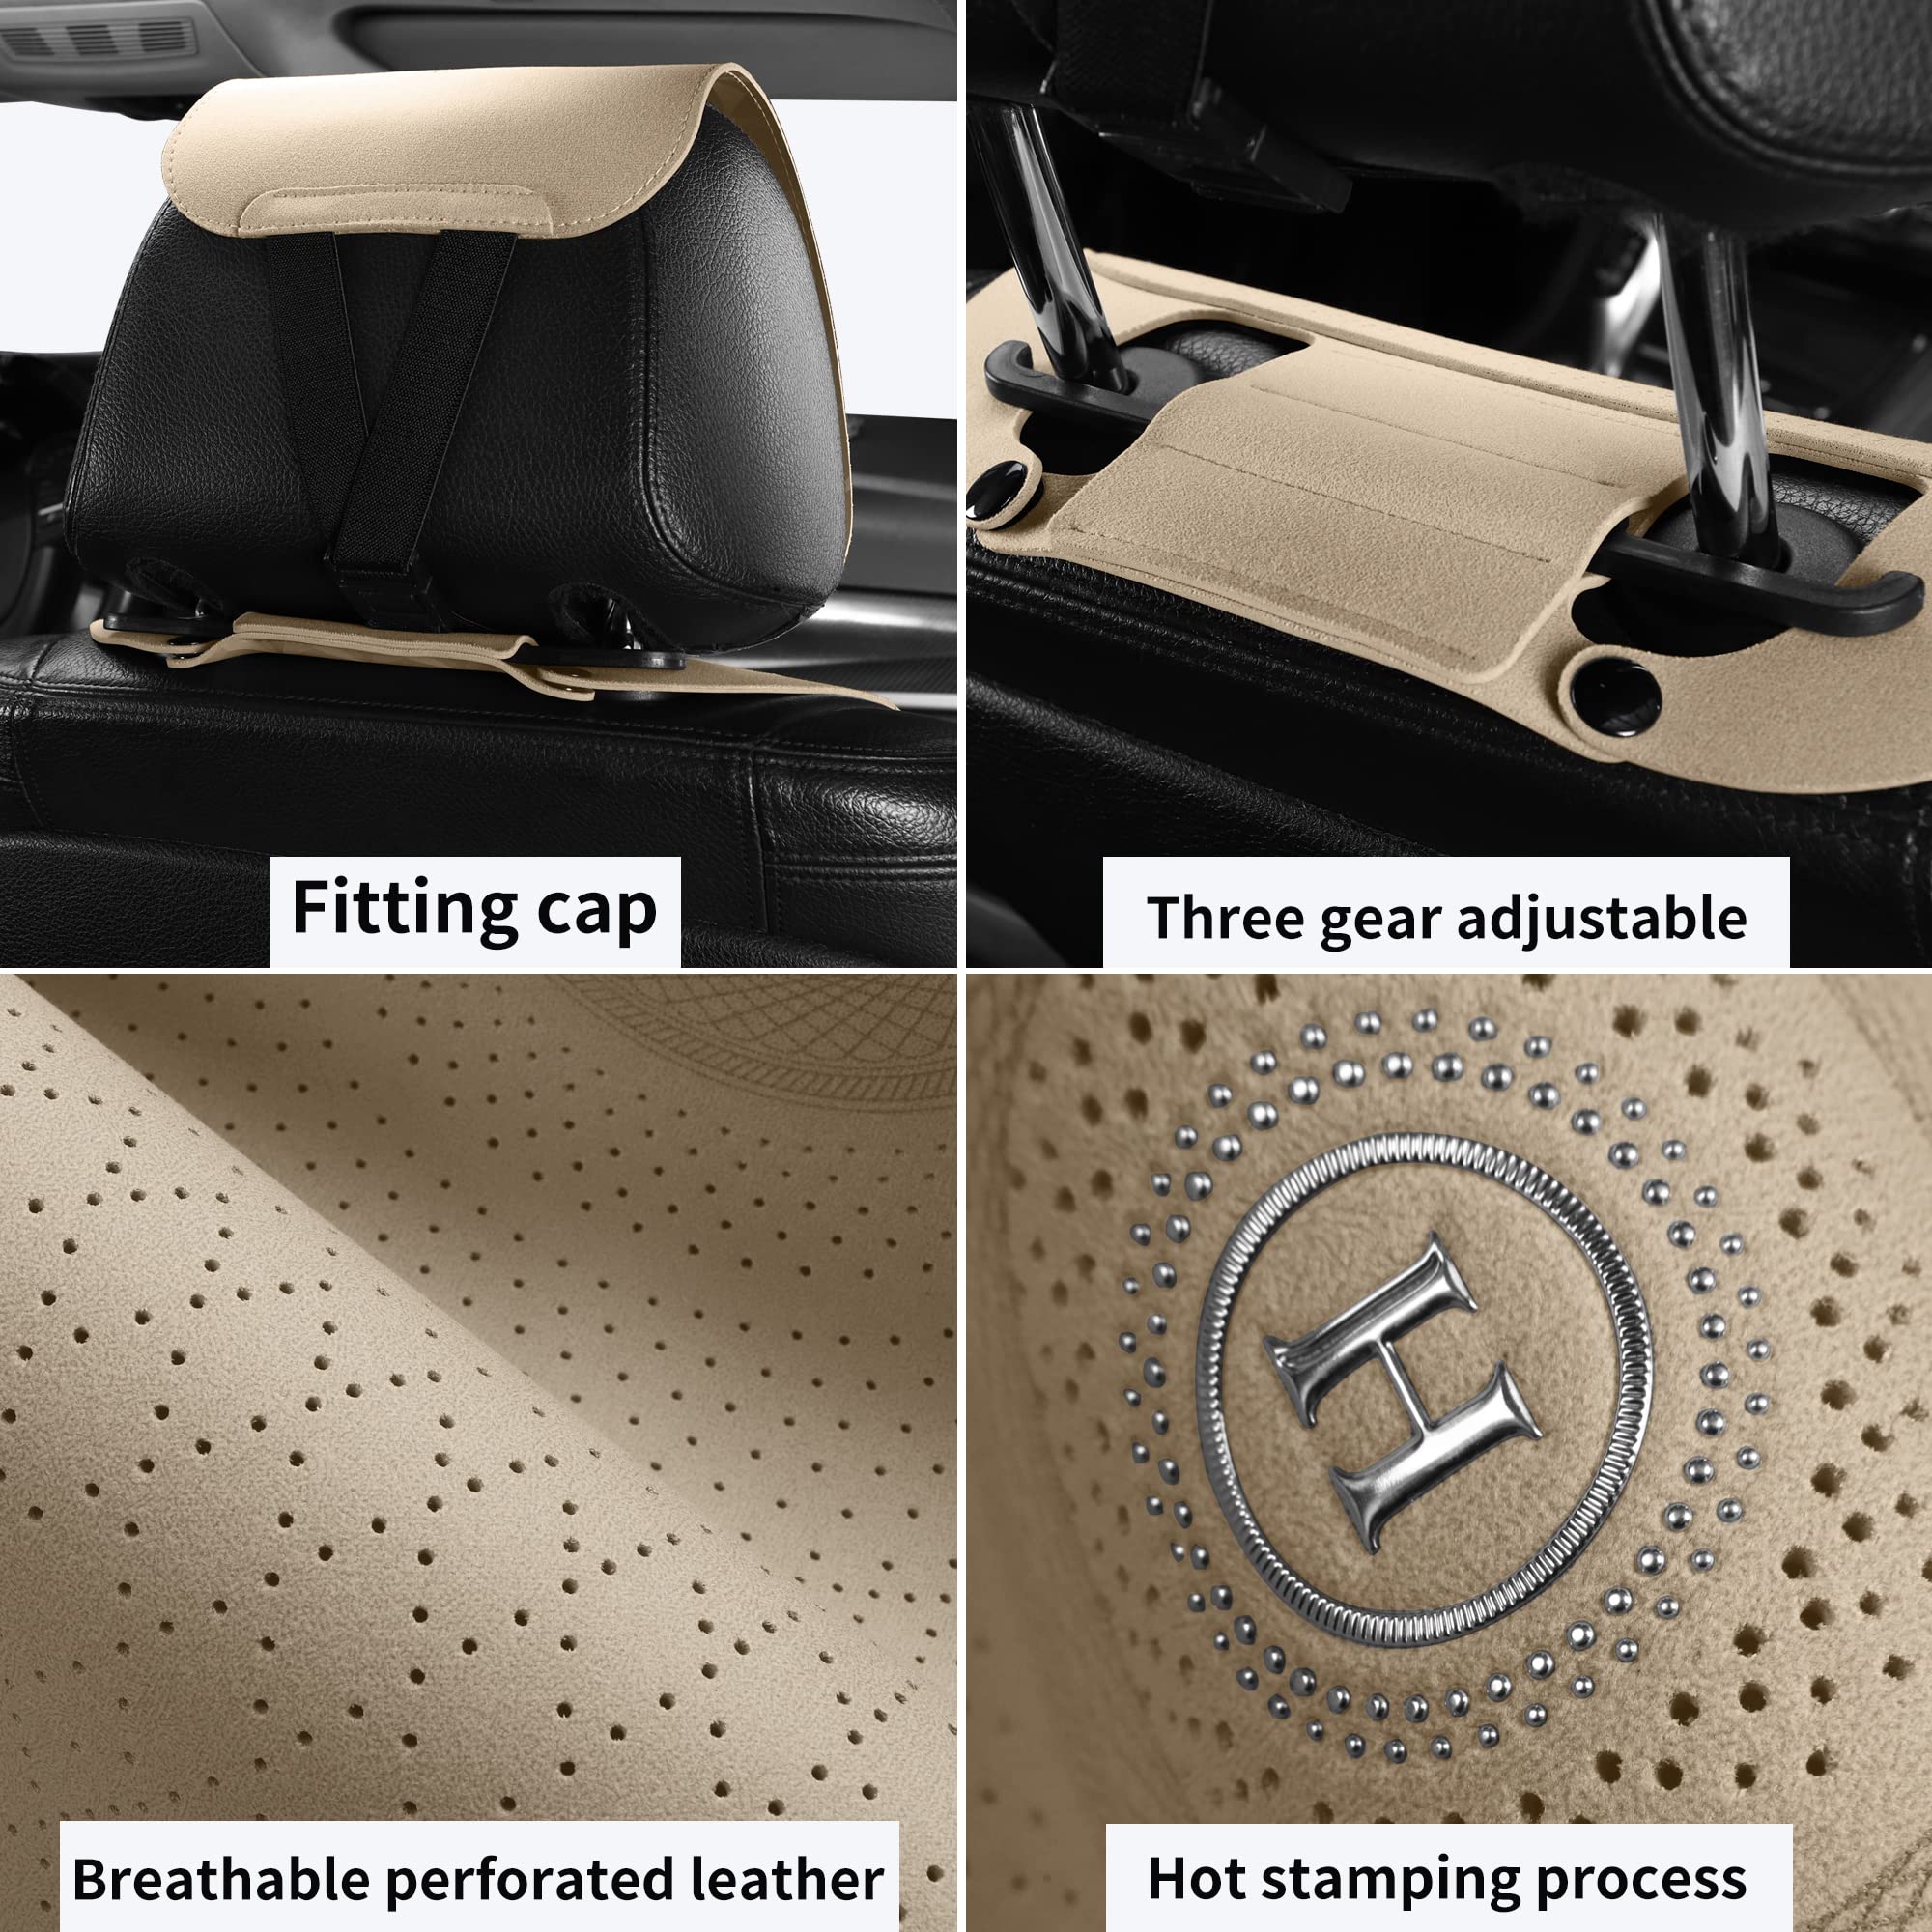 TAPHA Luxury Suede Leather Universal Car Seat Cover with Headrest, Ultra-Thin and Breathable, Highlight Car Interior with Suede Leather, 2 PCS for Front Seats (Beige)